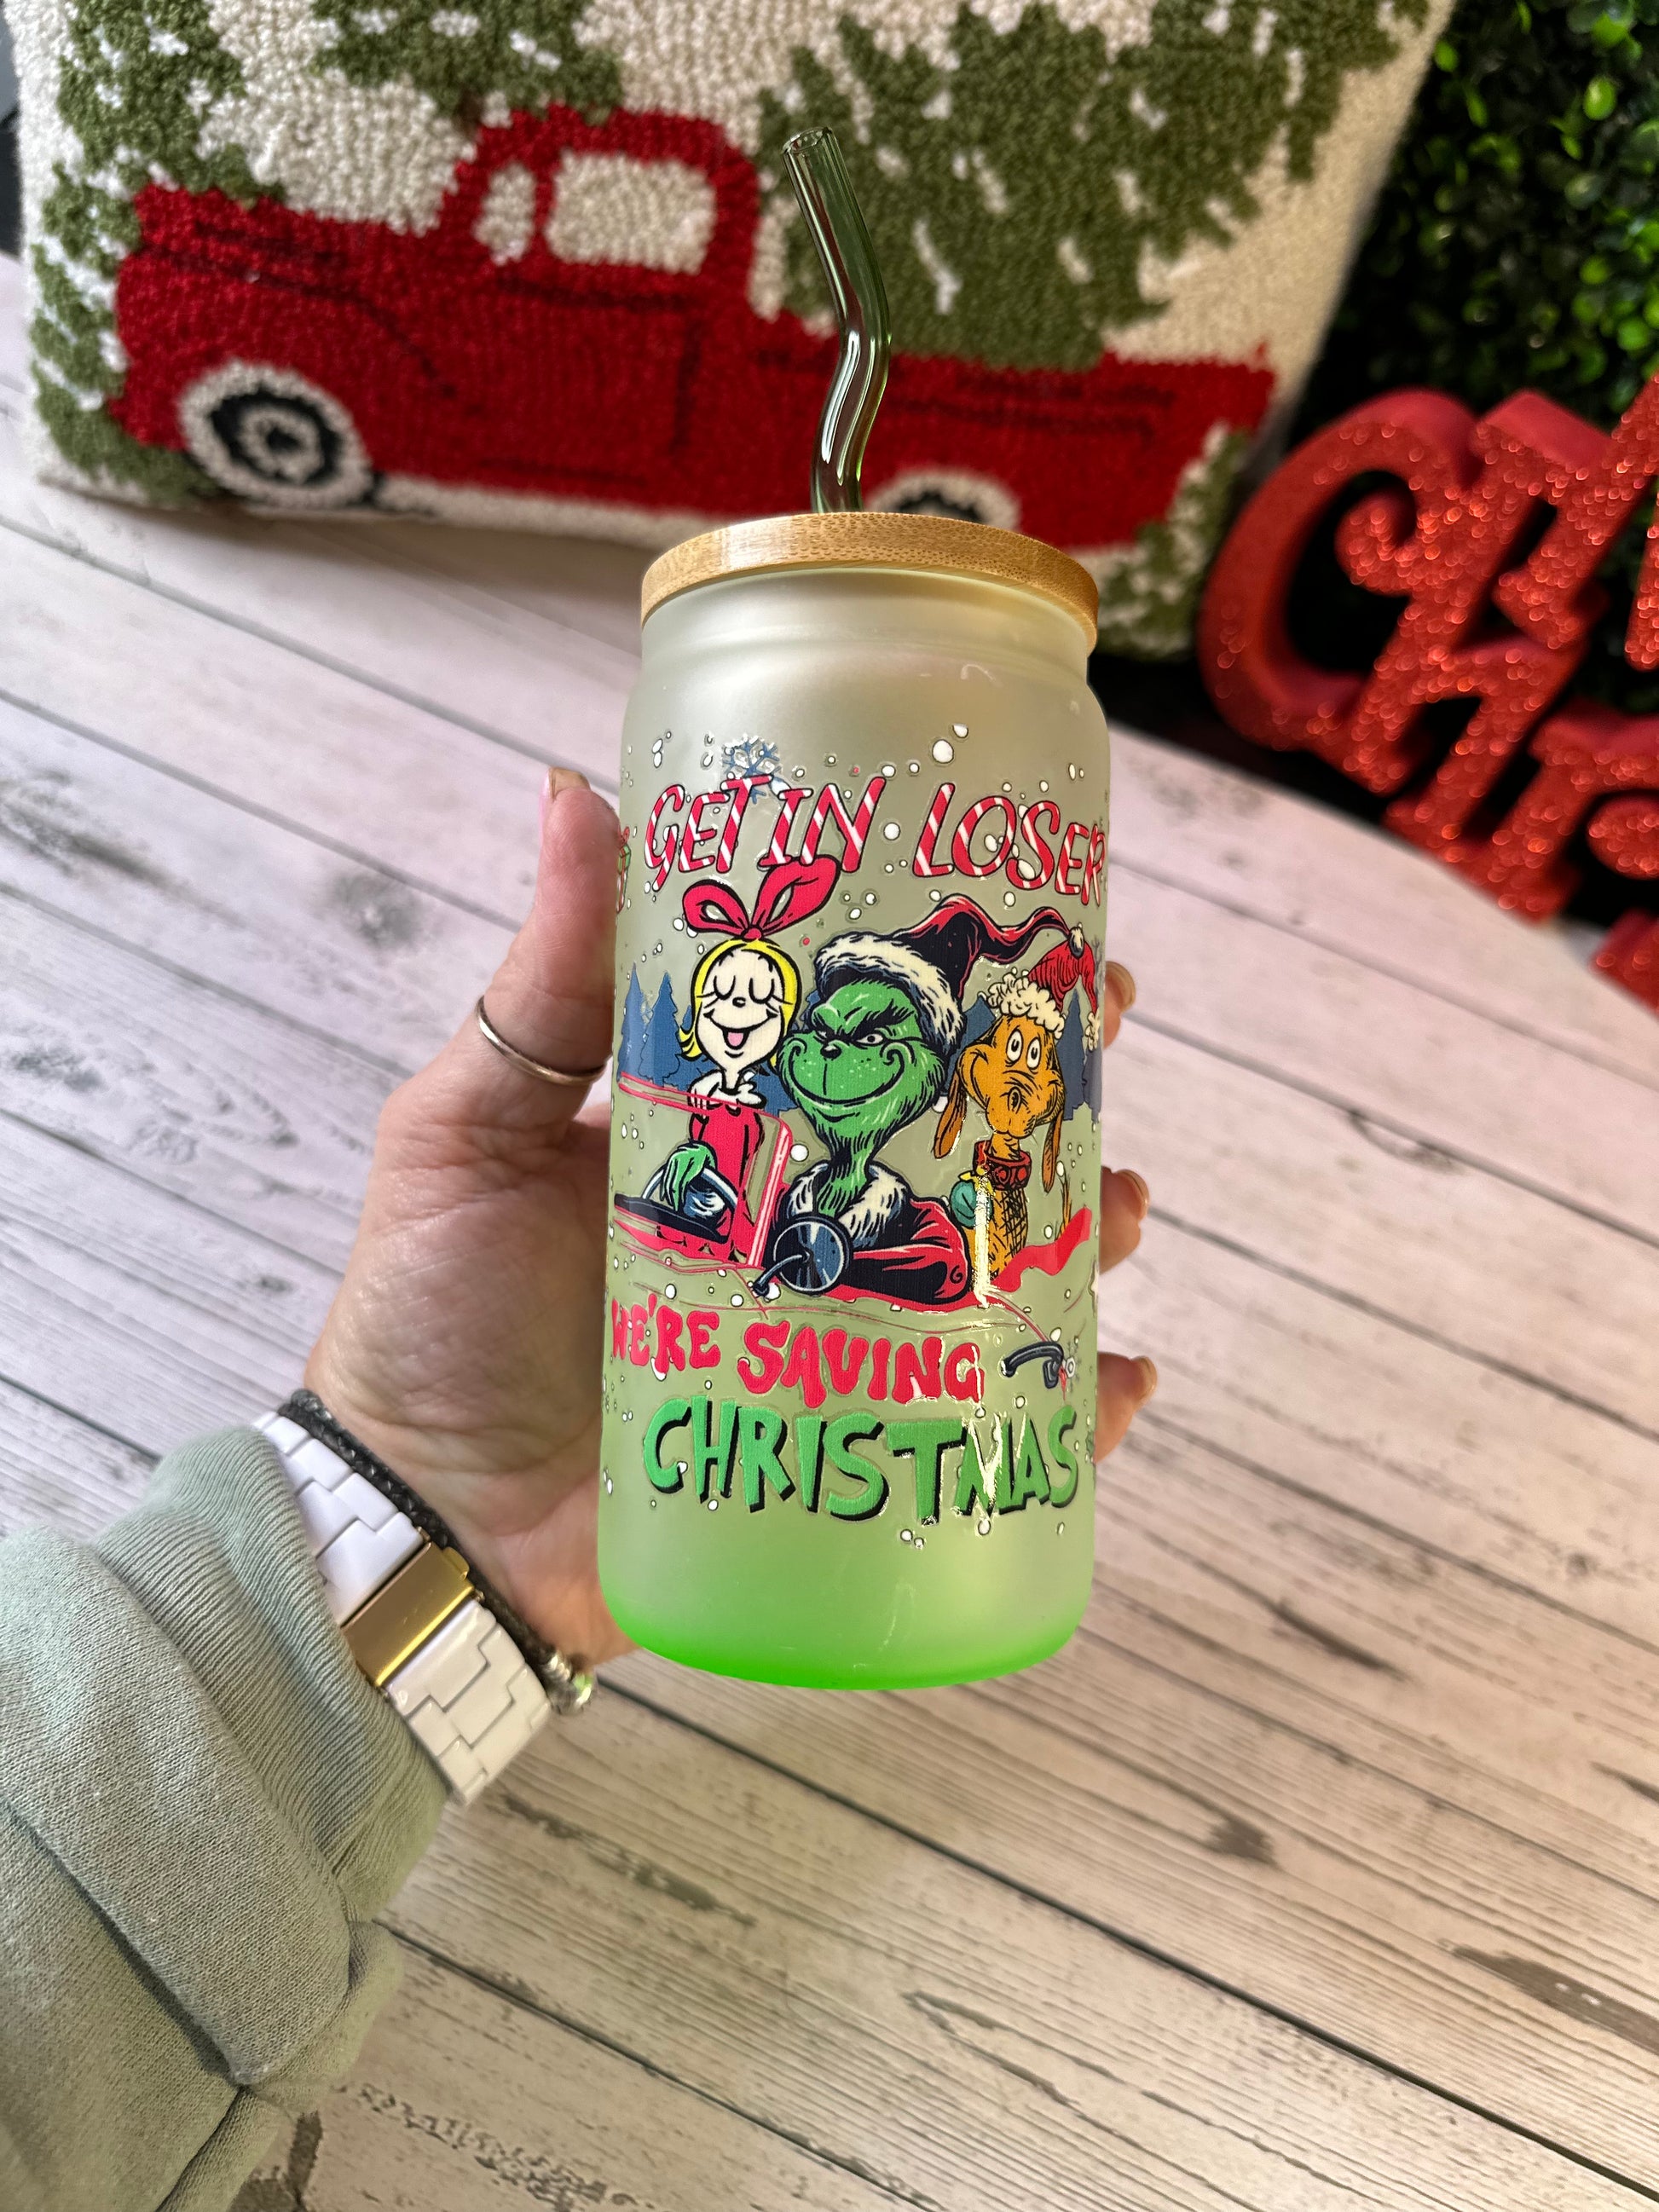 Ombré Green Get In Loser we’re saving Christmas glass cup - Willow Love Bug Designs 